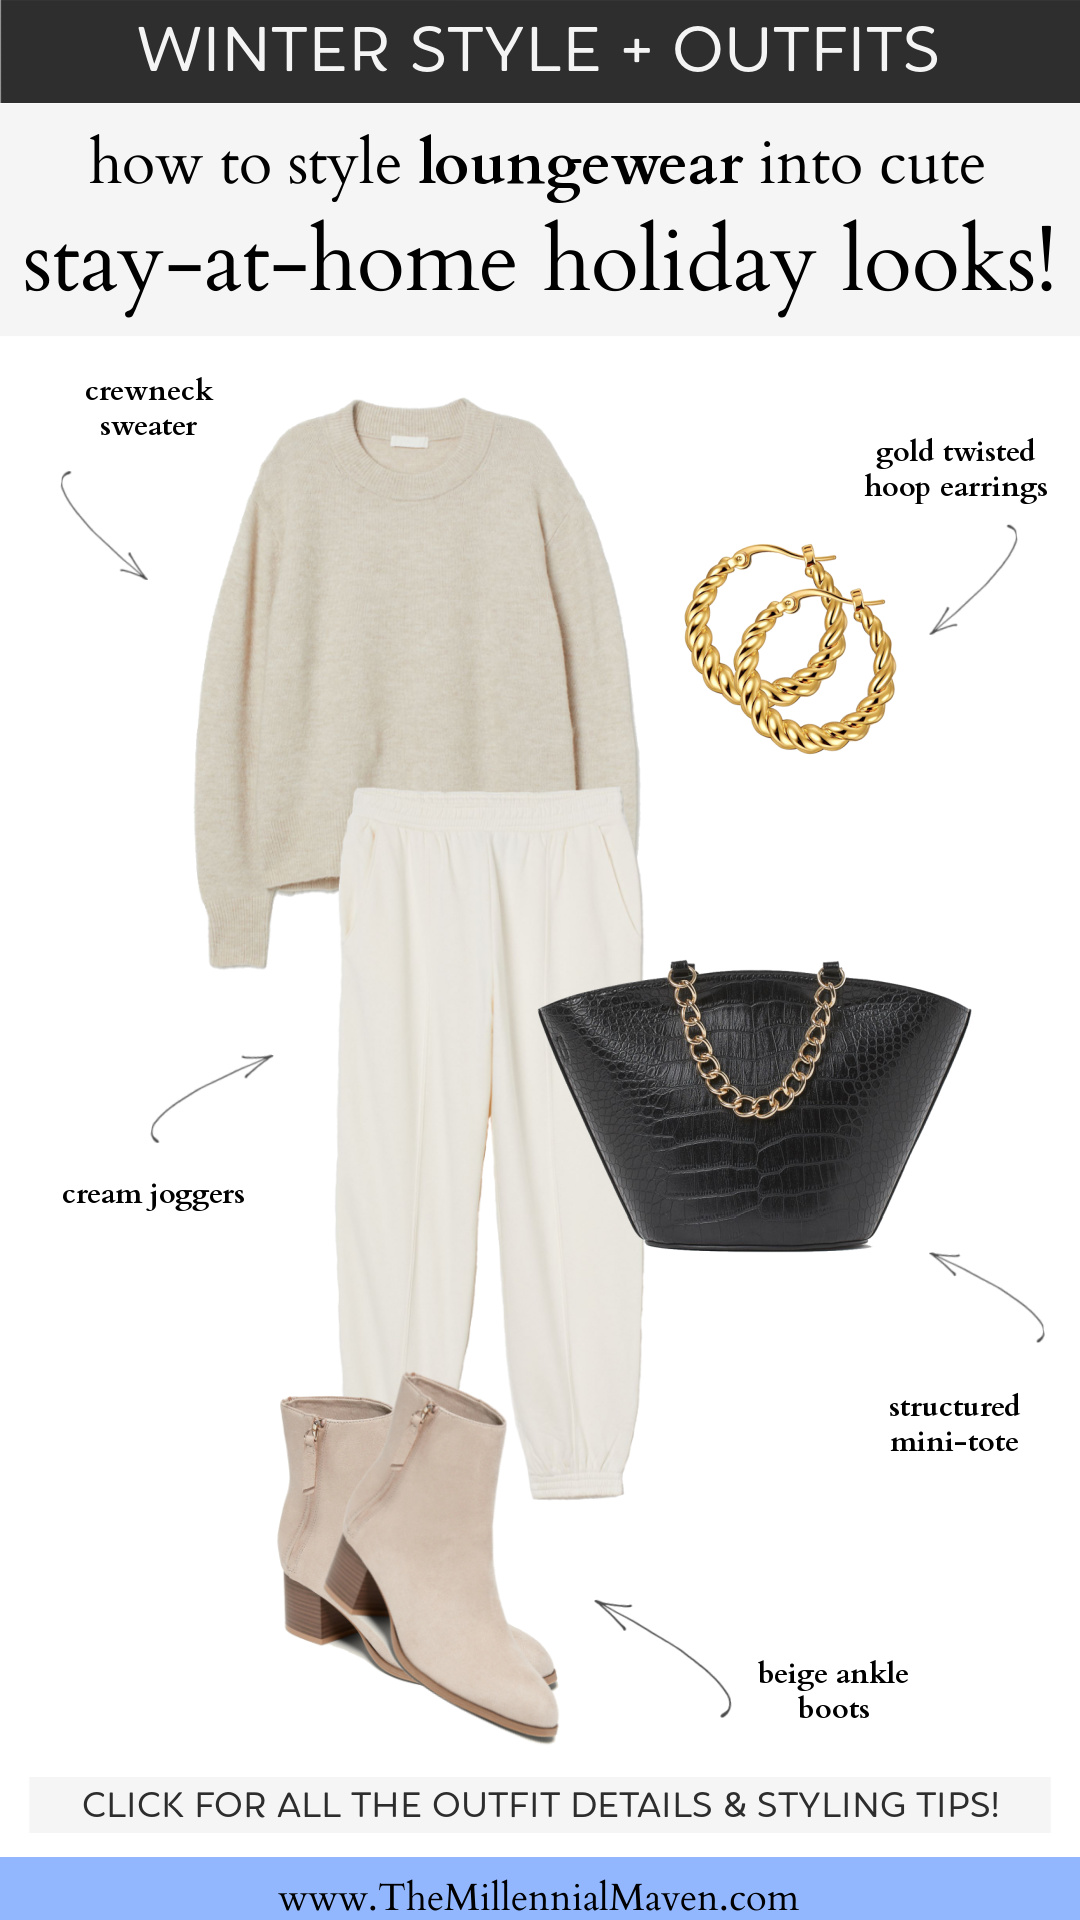 How to style loungewear for low-key holidays at home. Soft &amp; cozy items up-styled so you can be comfy *and* cute. | Winter Outfits December #PersonalStyle #TravelOutfits #Loungewear